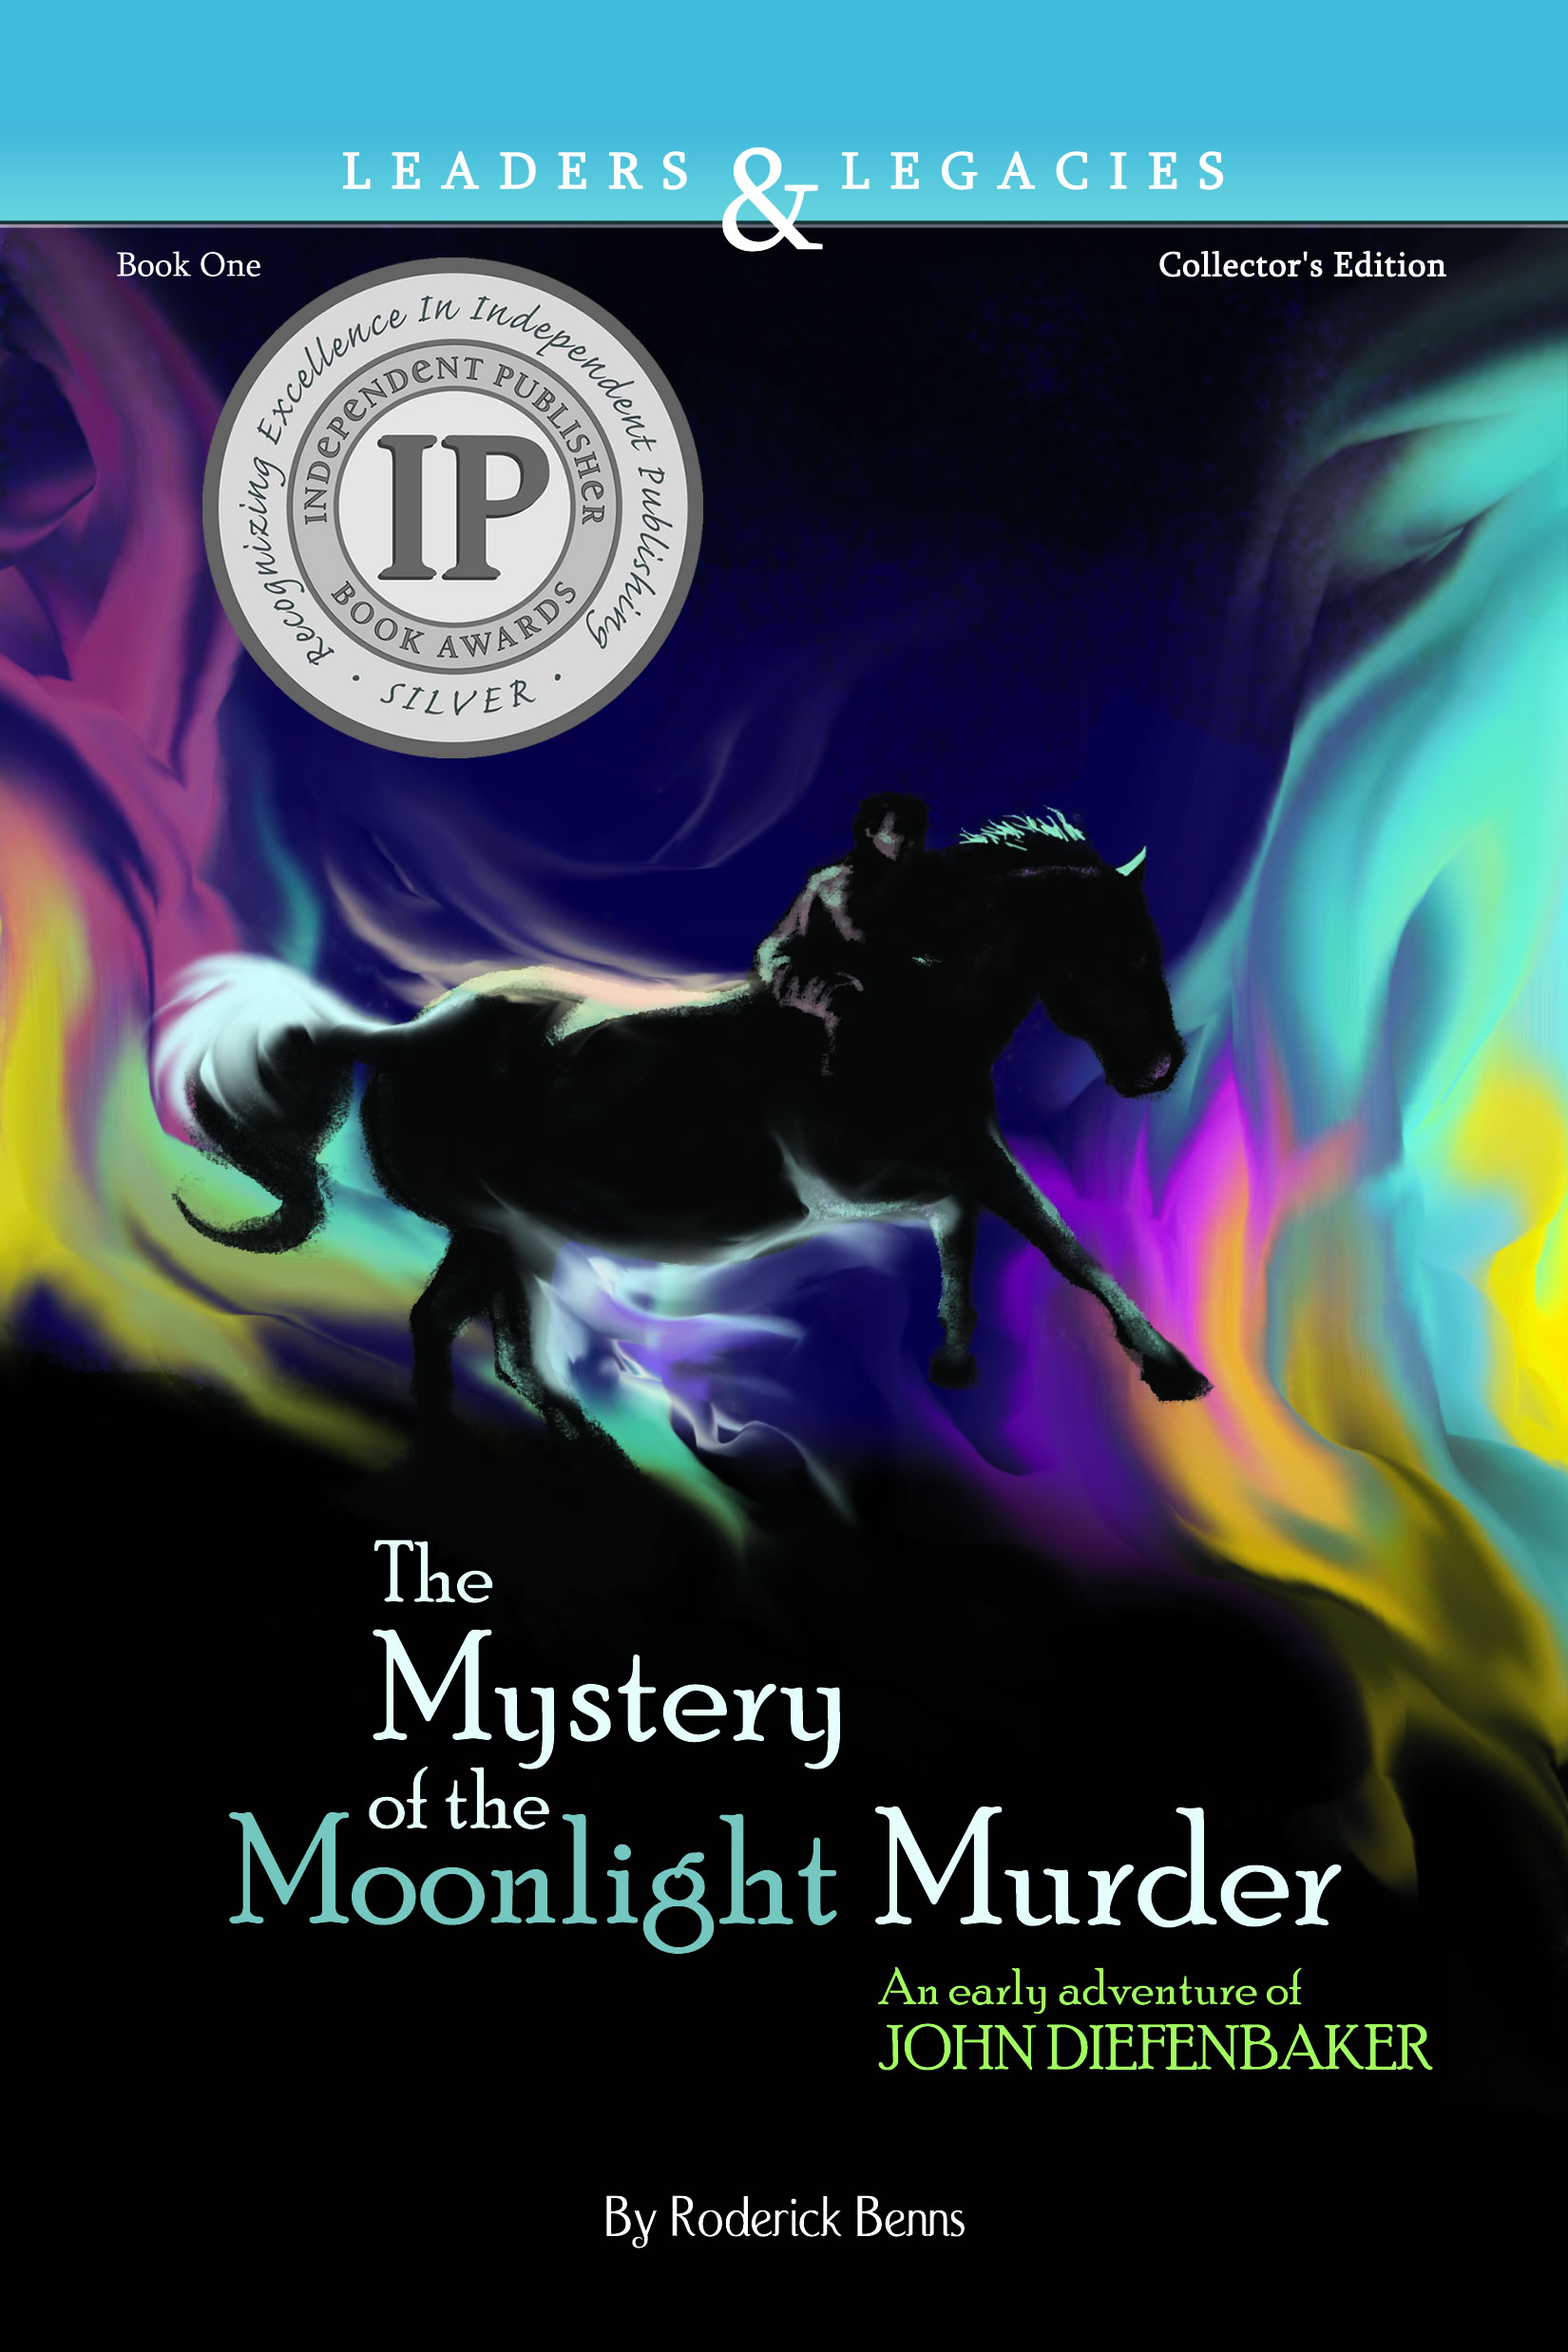 The Mystery of the Moonlight Murder: An Early Adventure of John Diefenbaker